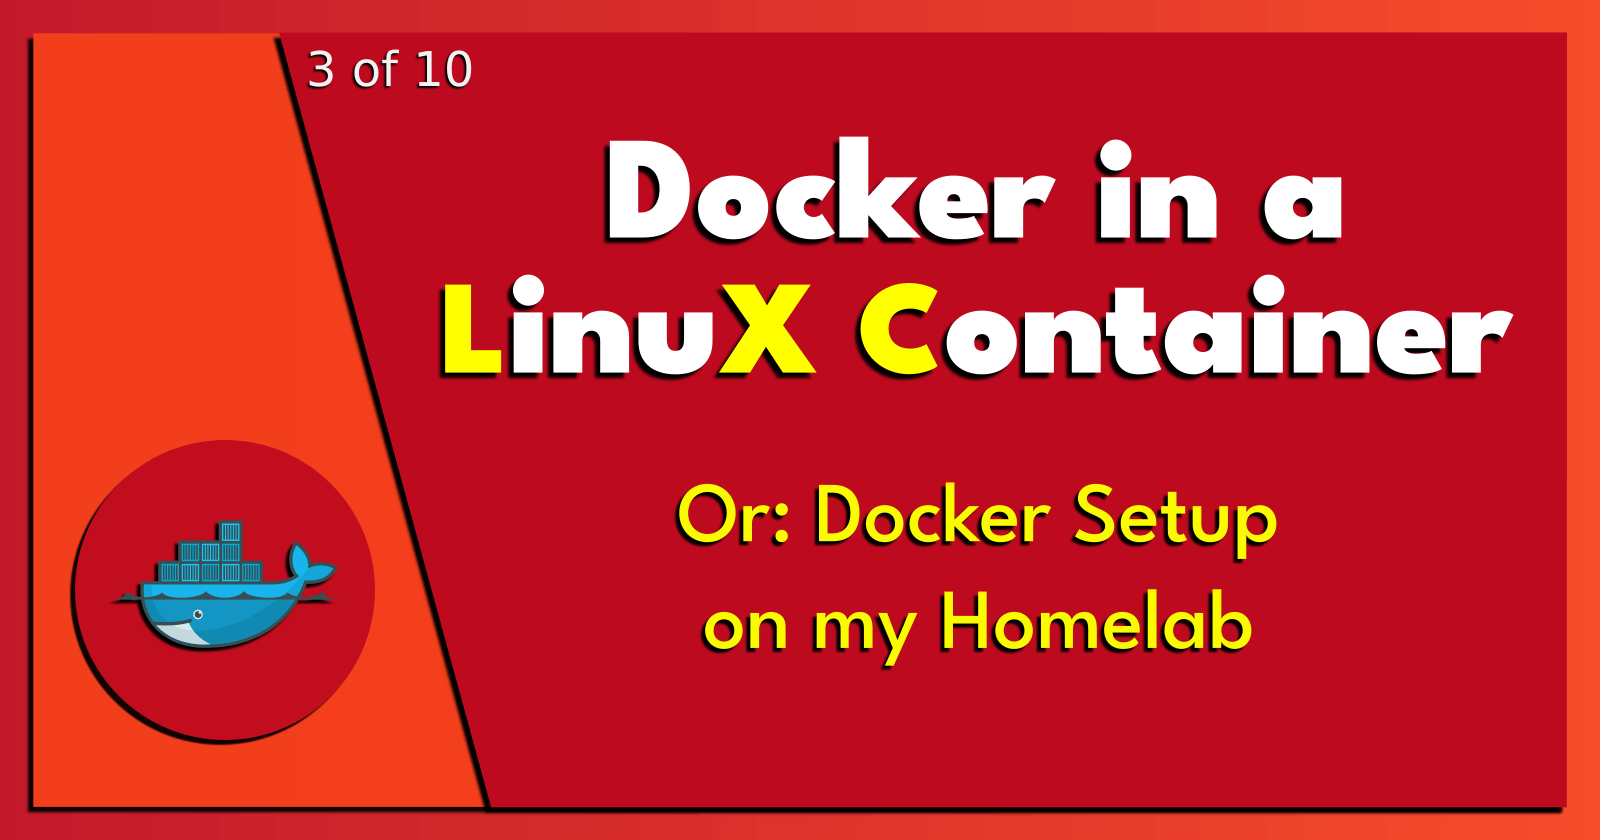 3 of 10: Docker in a LinuX Container.